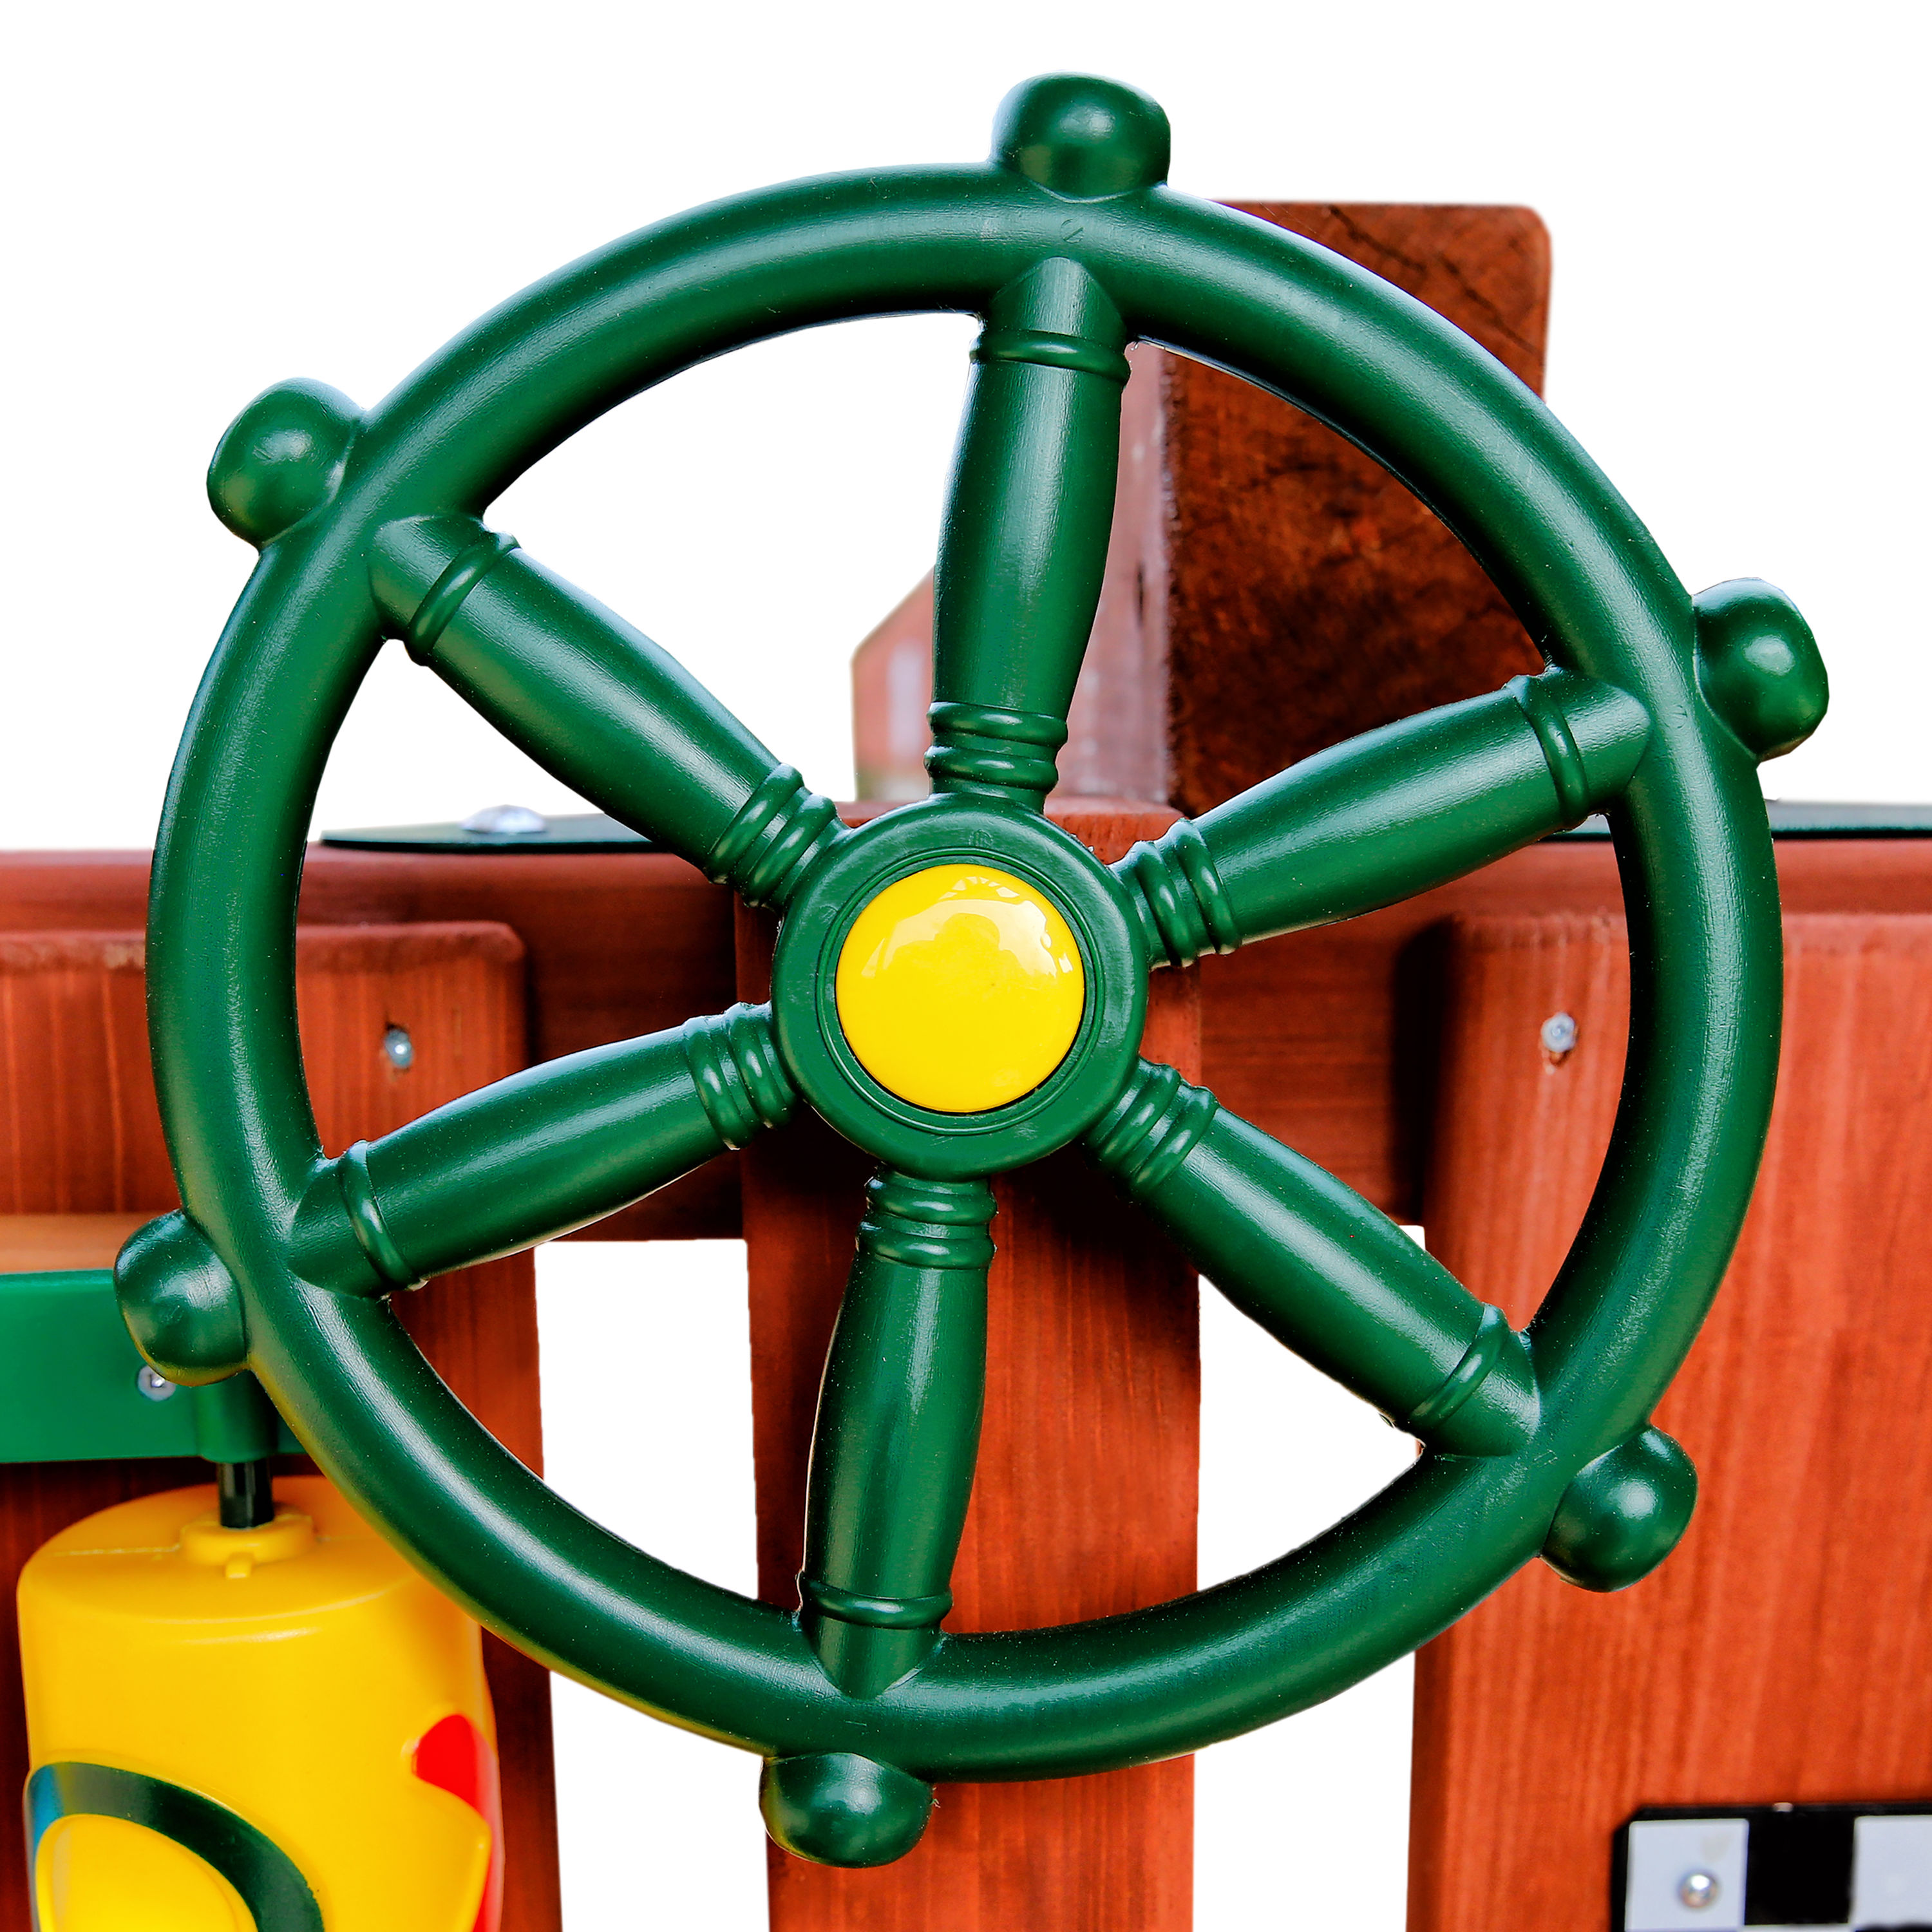 Plastic Pirate's Ship Steering Wheel For Playsets & Swing Sets